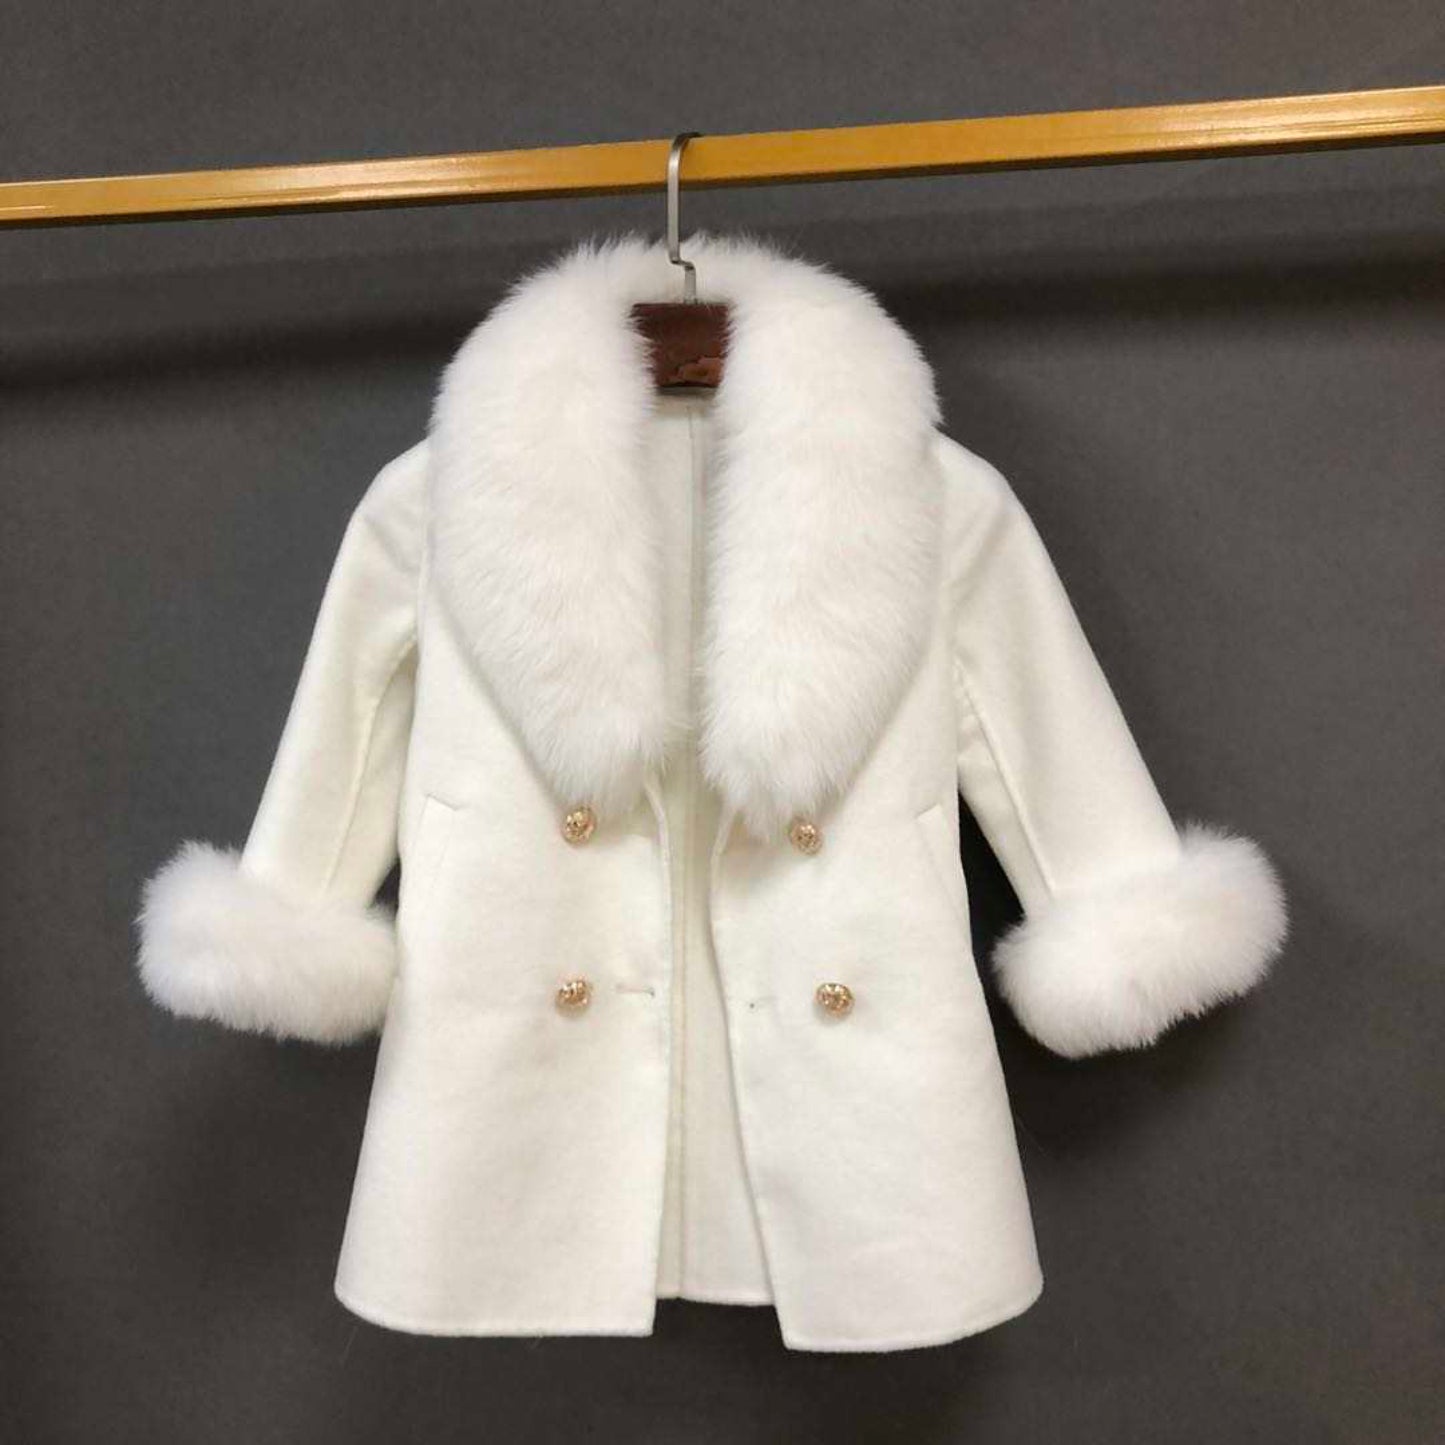 Wool Trench Coat with Fox Fur Collar